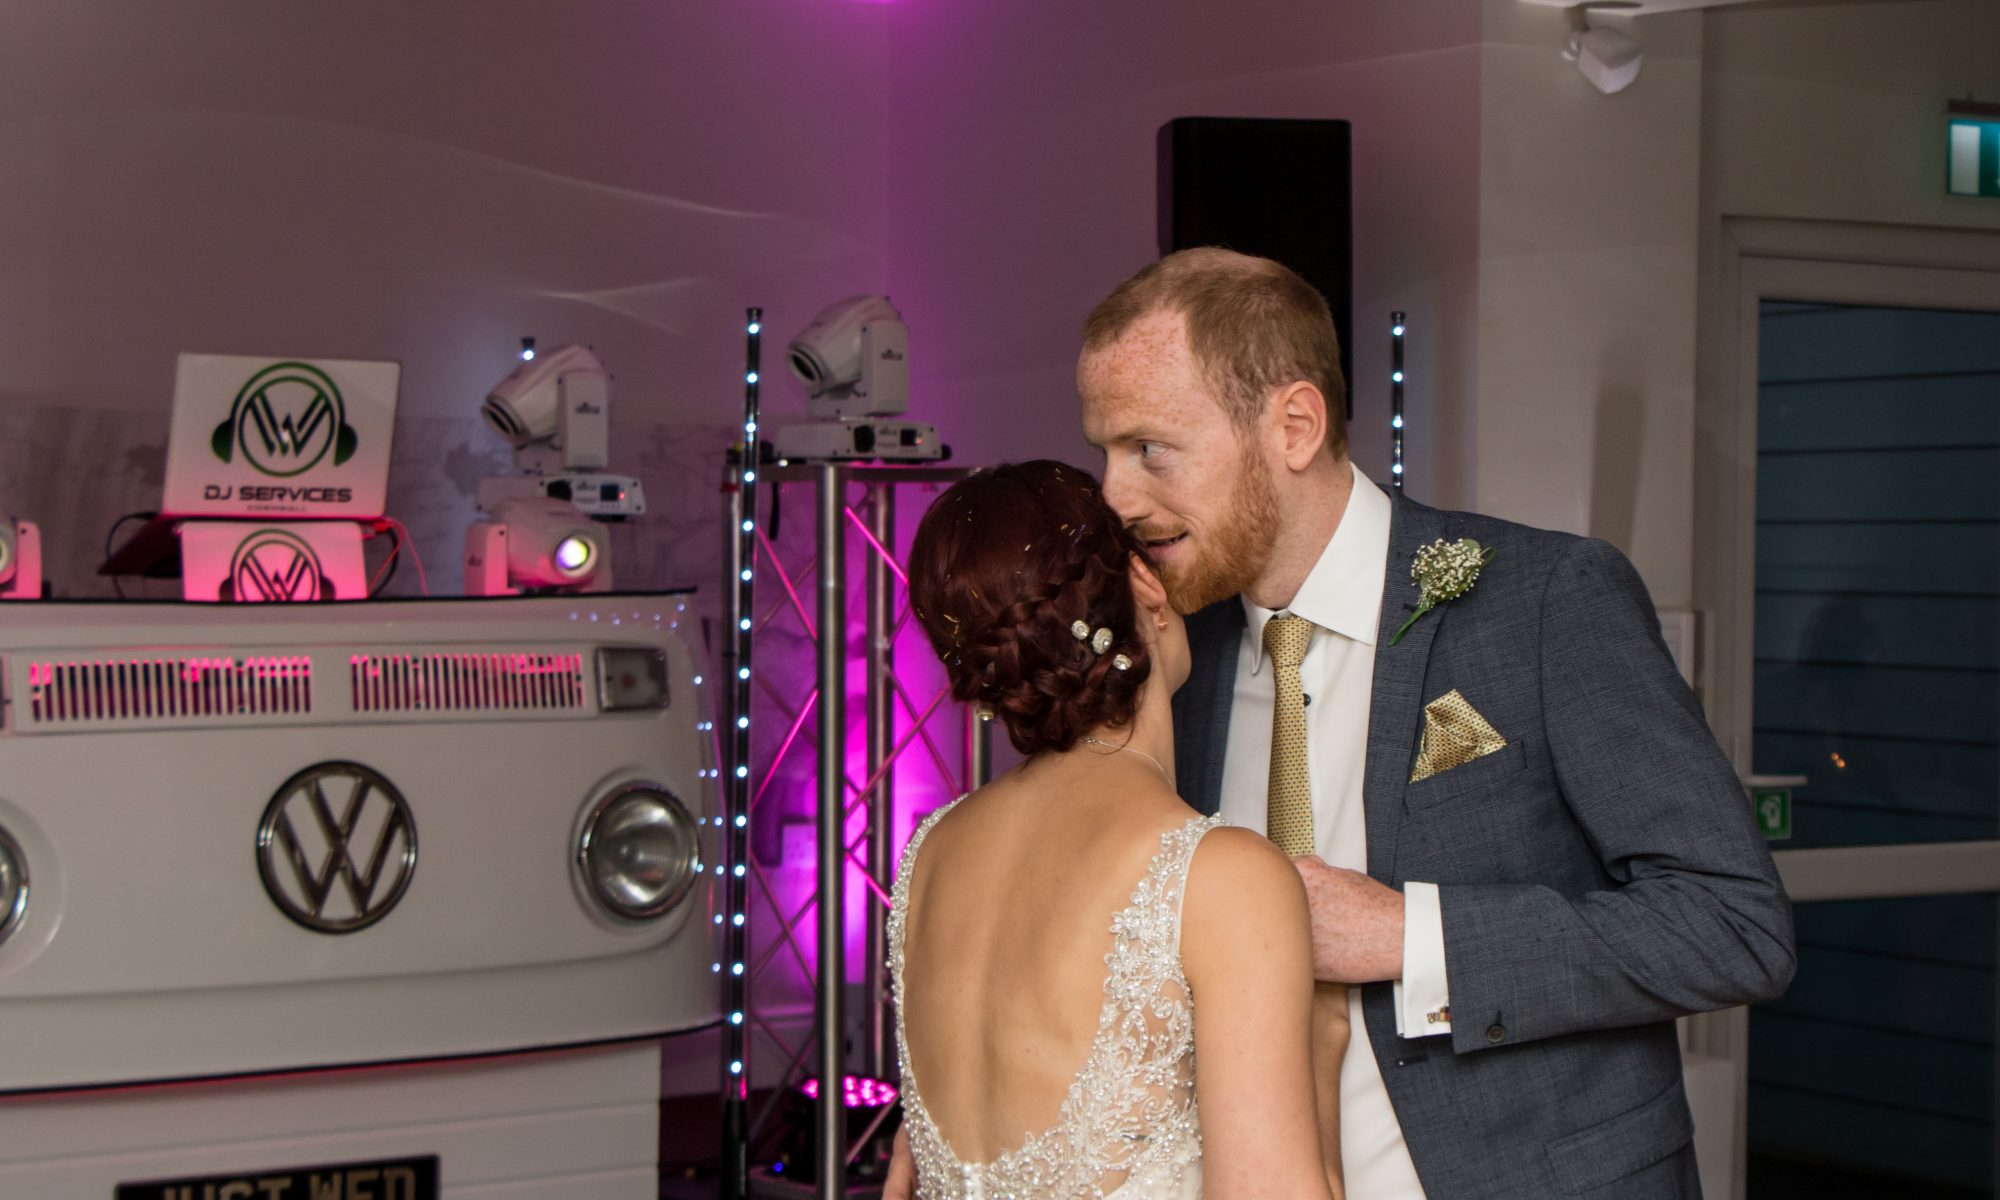 Lets get the party started with the first dance for Phill's and Sams wedding with our DJ Cornwall.